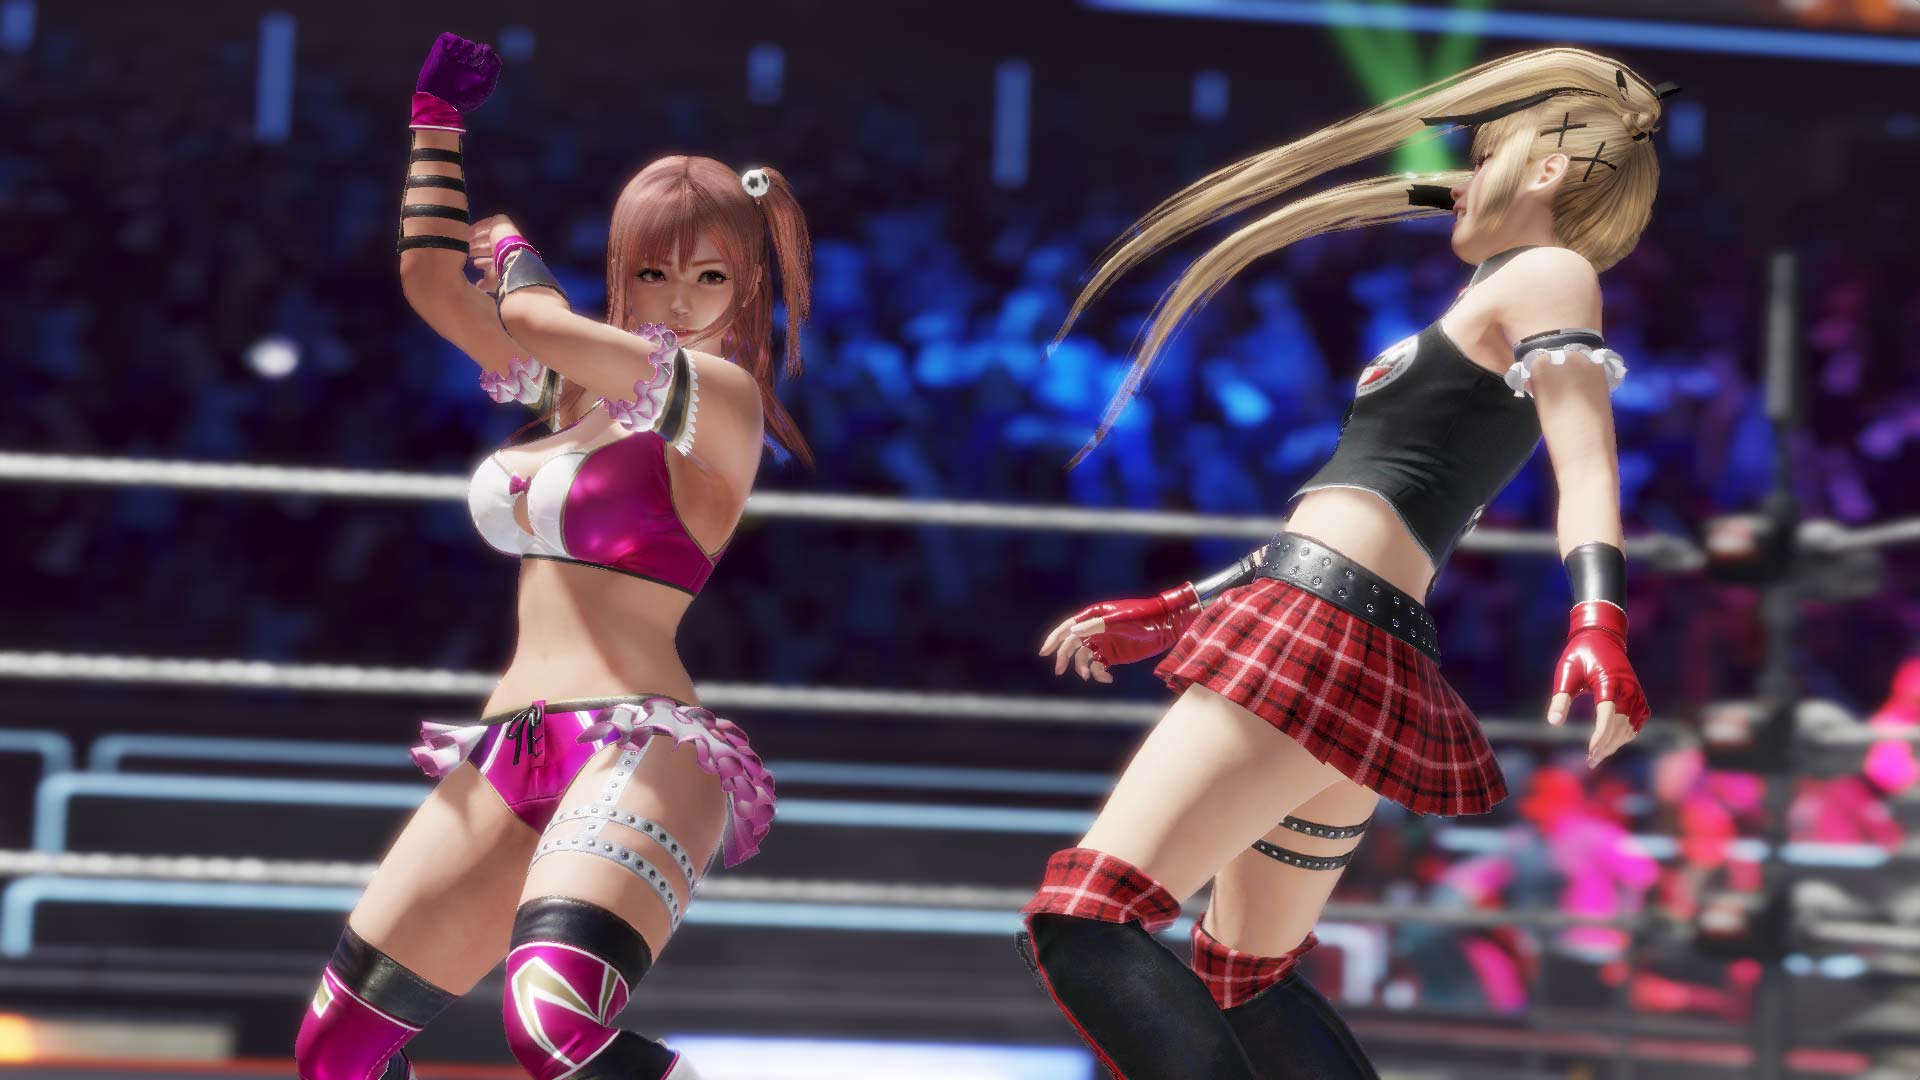 DEAD OR ALIVE 6 Review